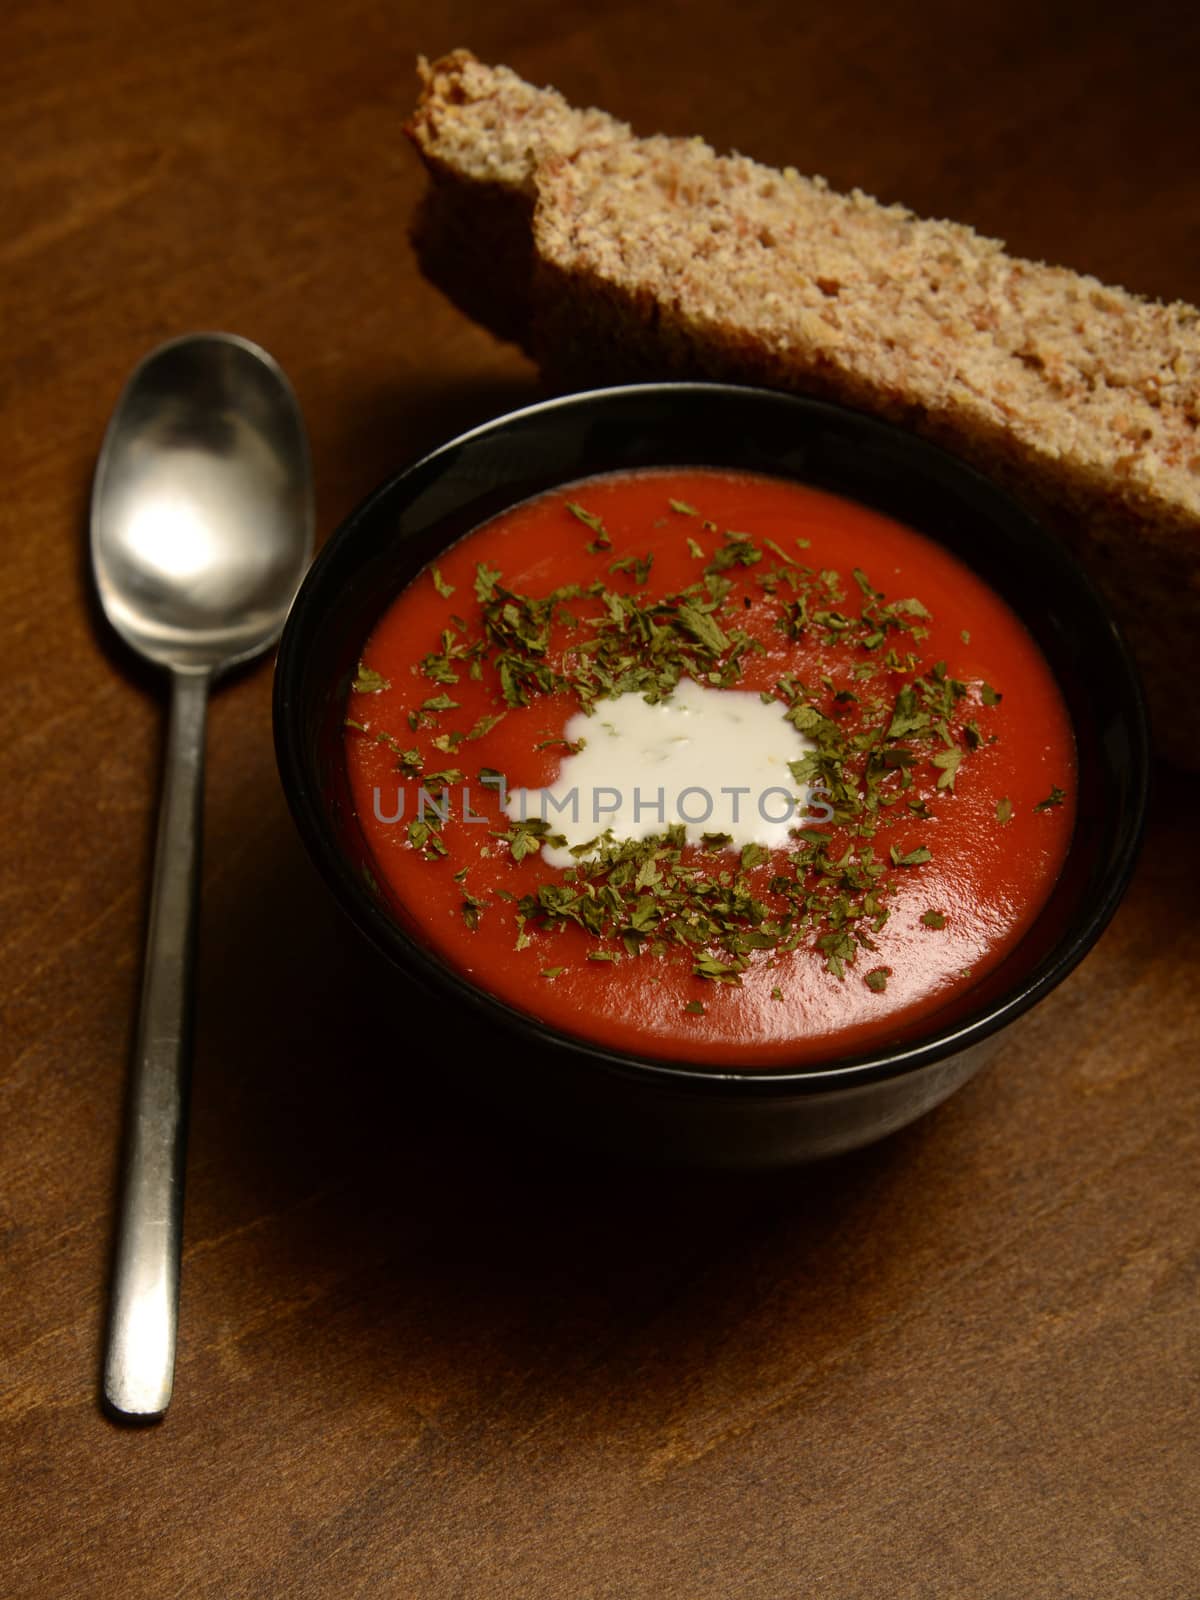 savory tomato soup and bread in rustic and cozy setting